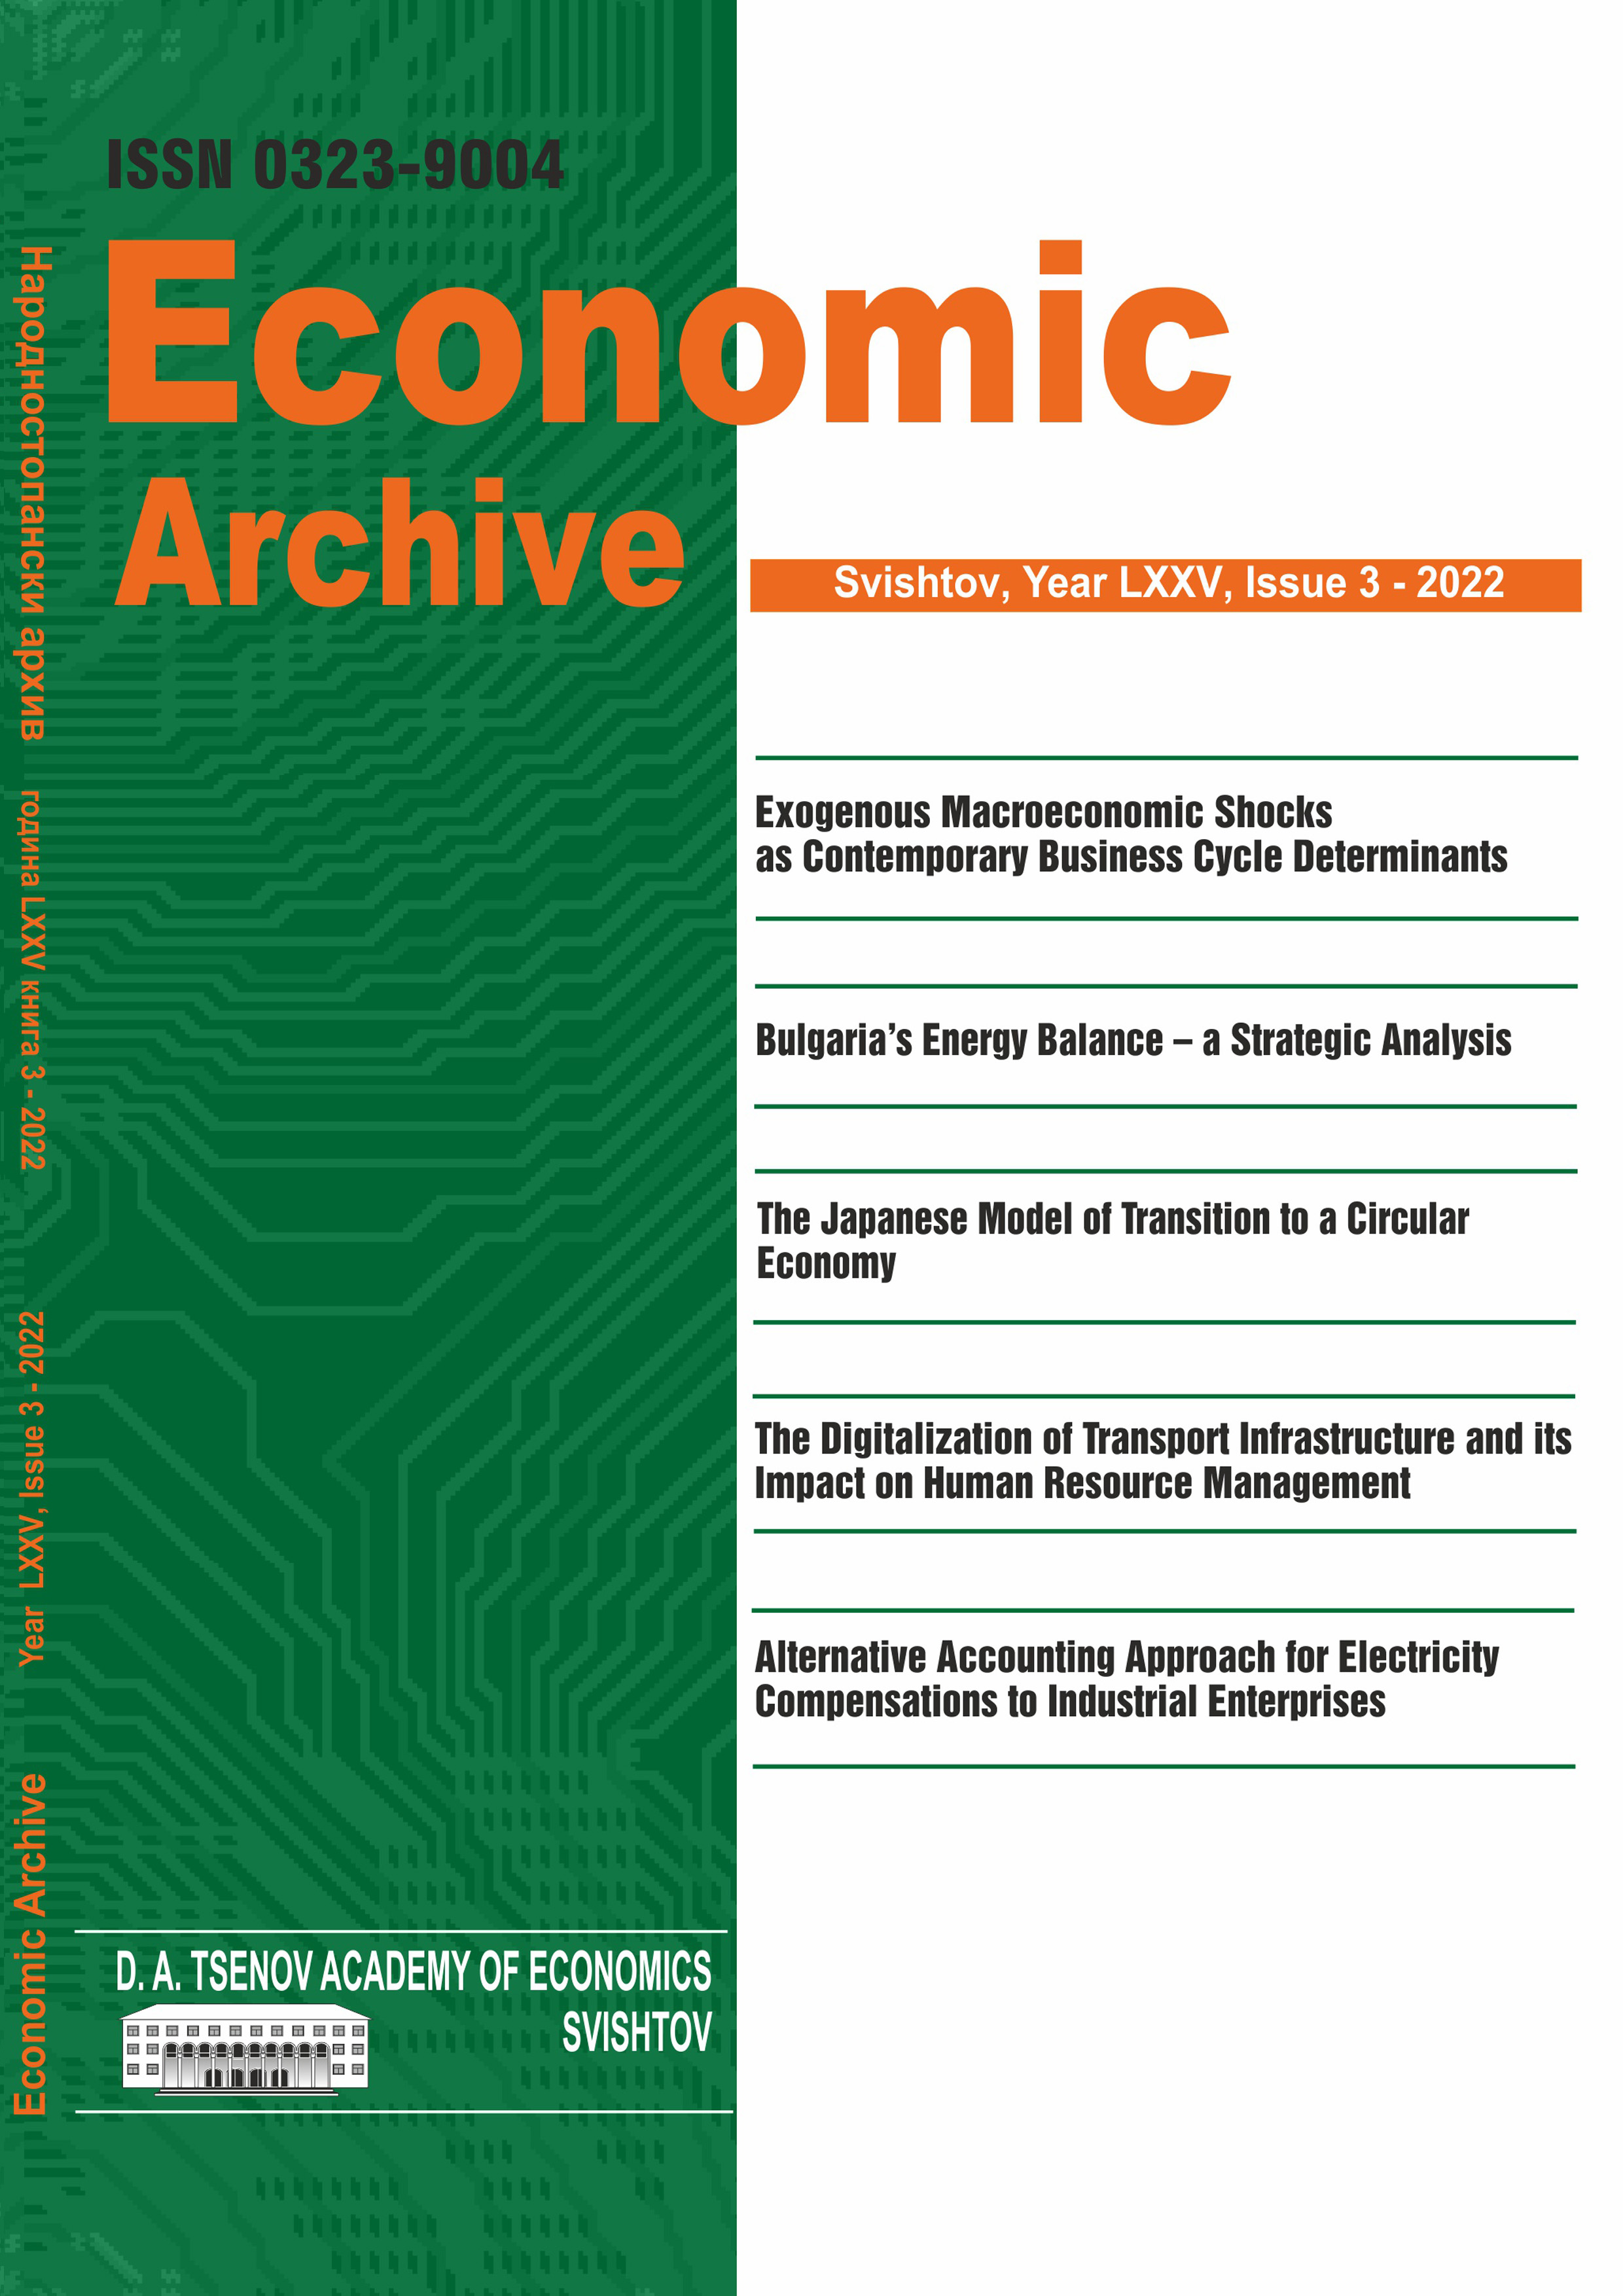 Exogenous Macroeconomic Shocks As Contemporary Business Cycle Determinants Cover Image